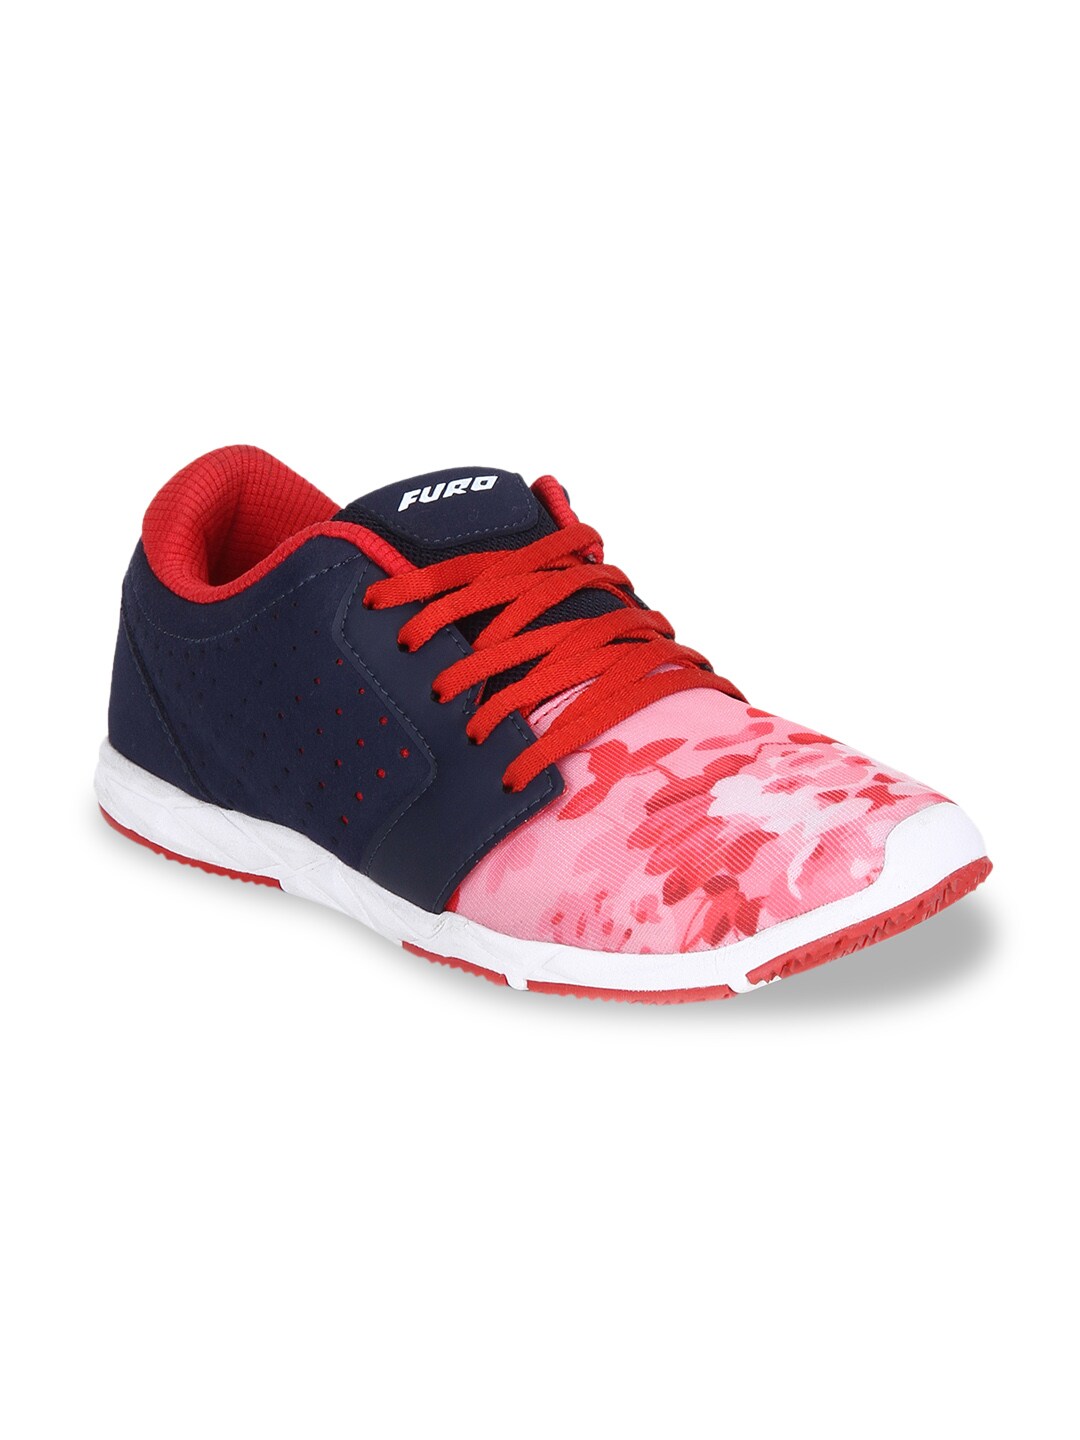 FURO by Red Chief Women Pink & Navy Blue Mesh Running Shoes Price in India